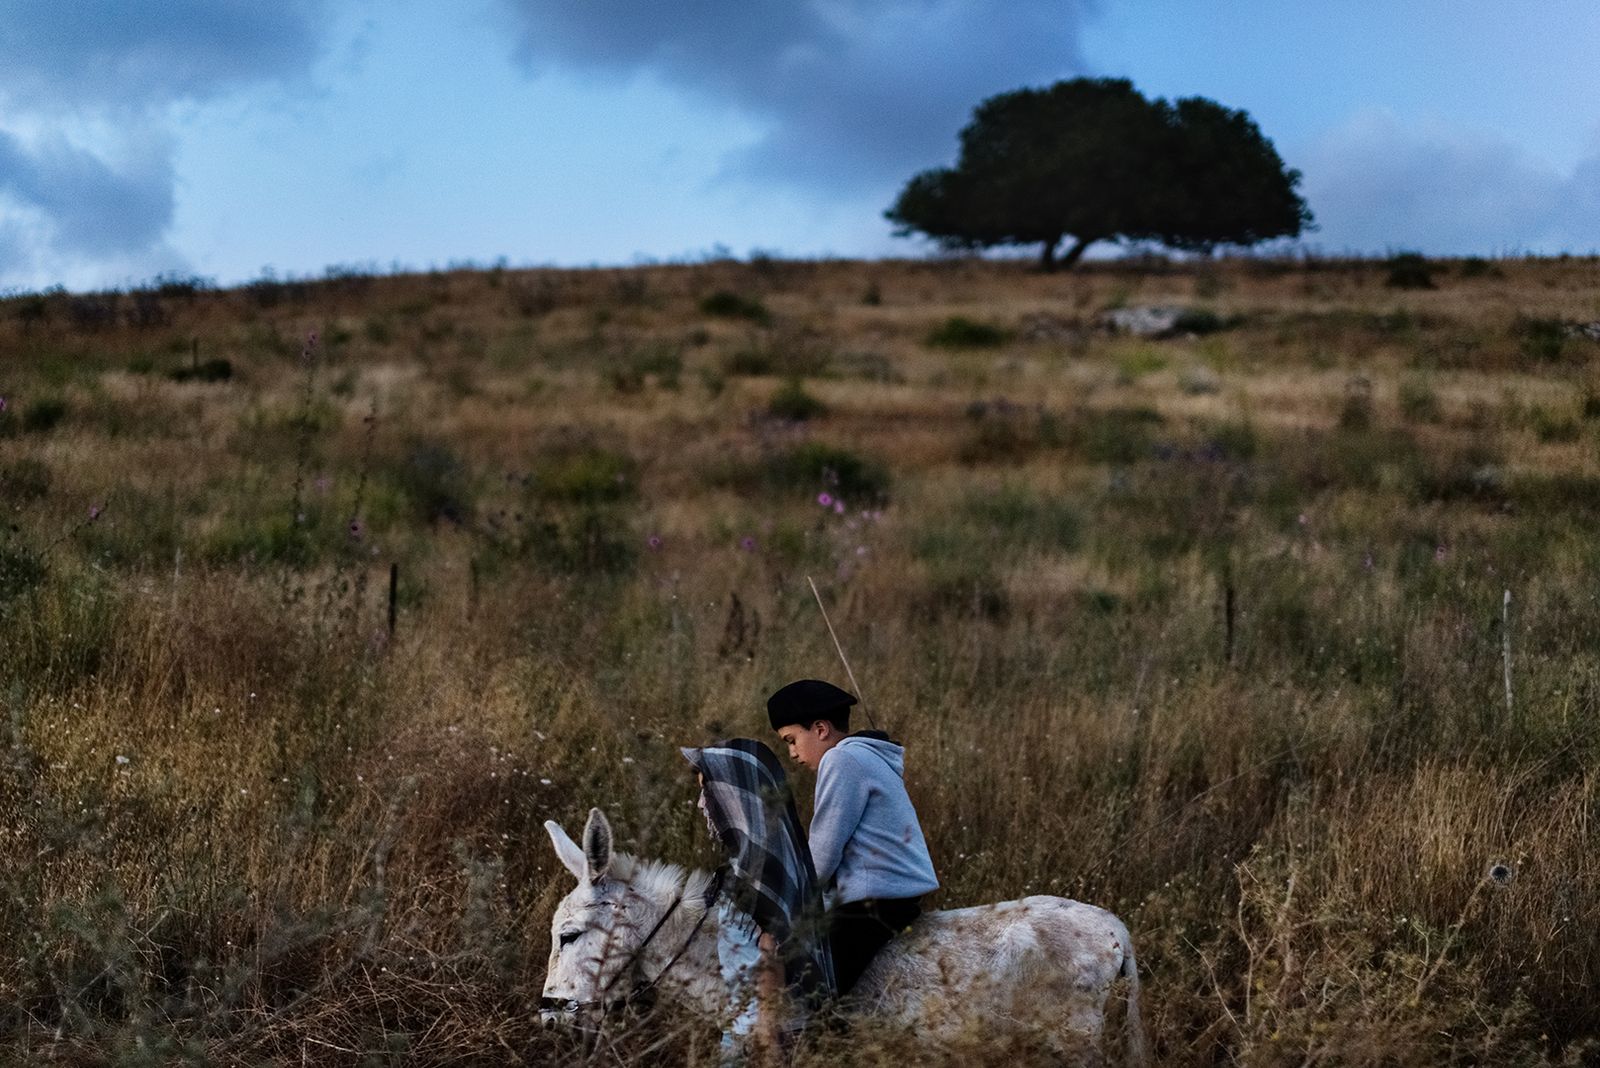 © Daniel Rolider - Uriya (l.) and his friend Erez, travels in the fields of Kiryat Tivon at sunset, Israel, May 2016.